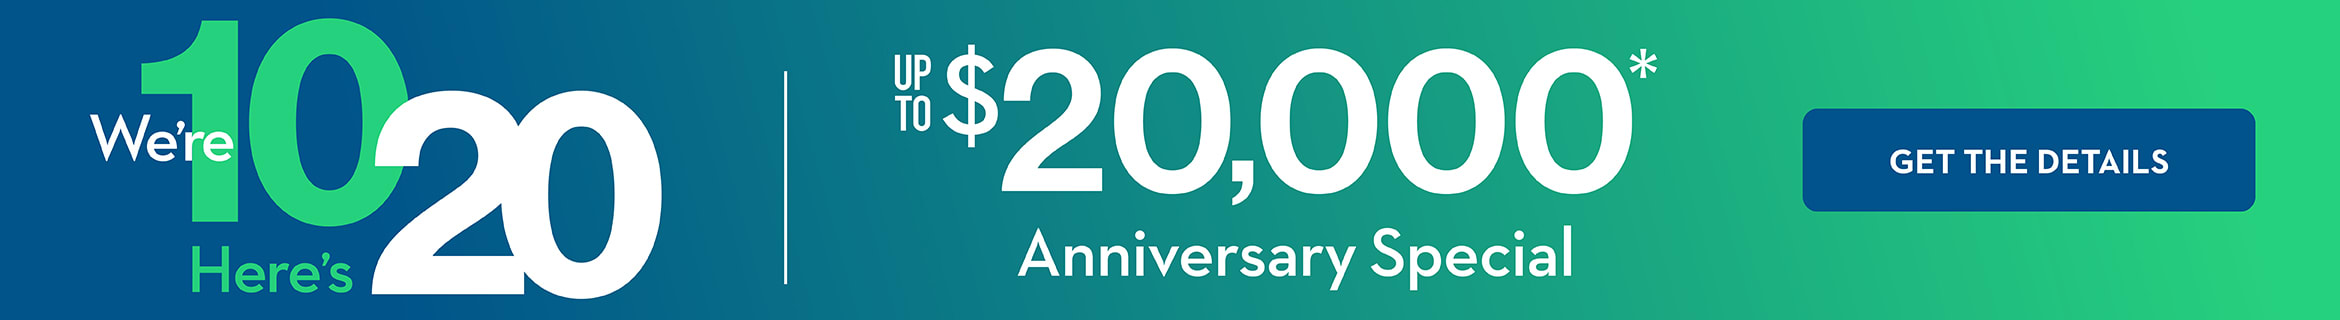 We're 10, Here's 20 | UP TO $20,000* | Anniversary Special | GET THE DETAILS